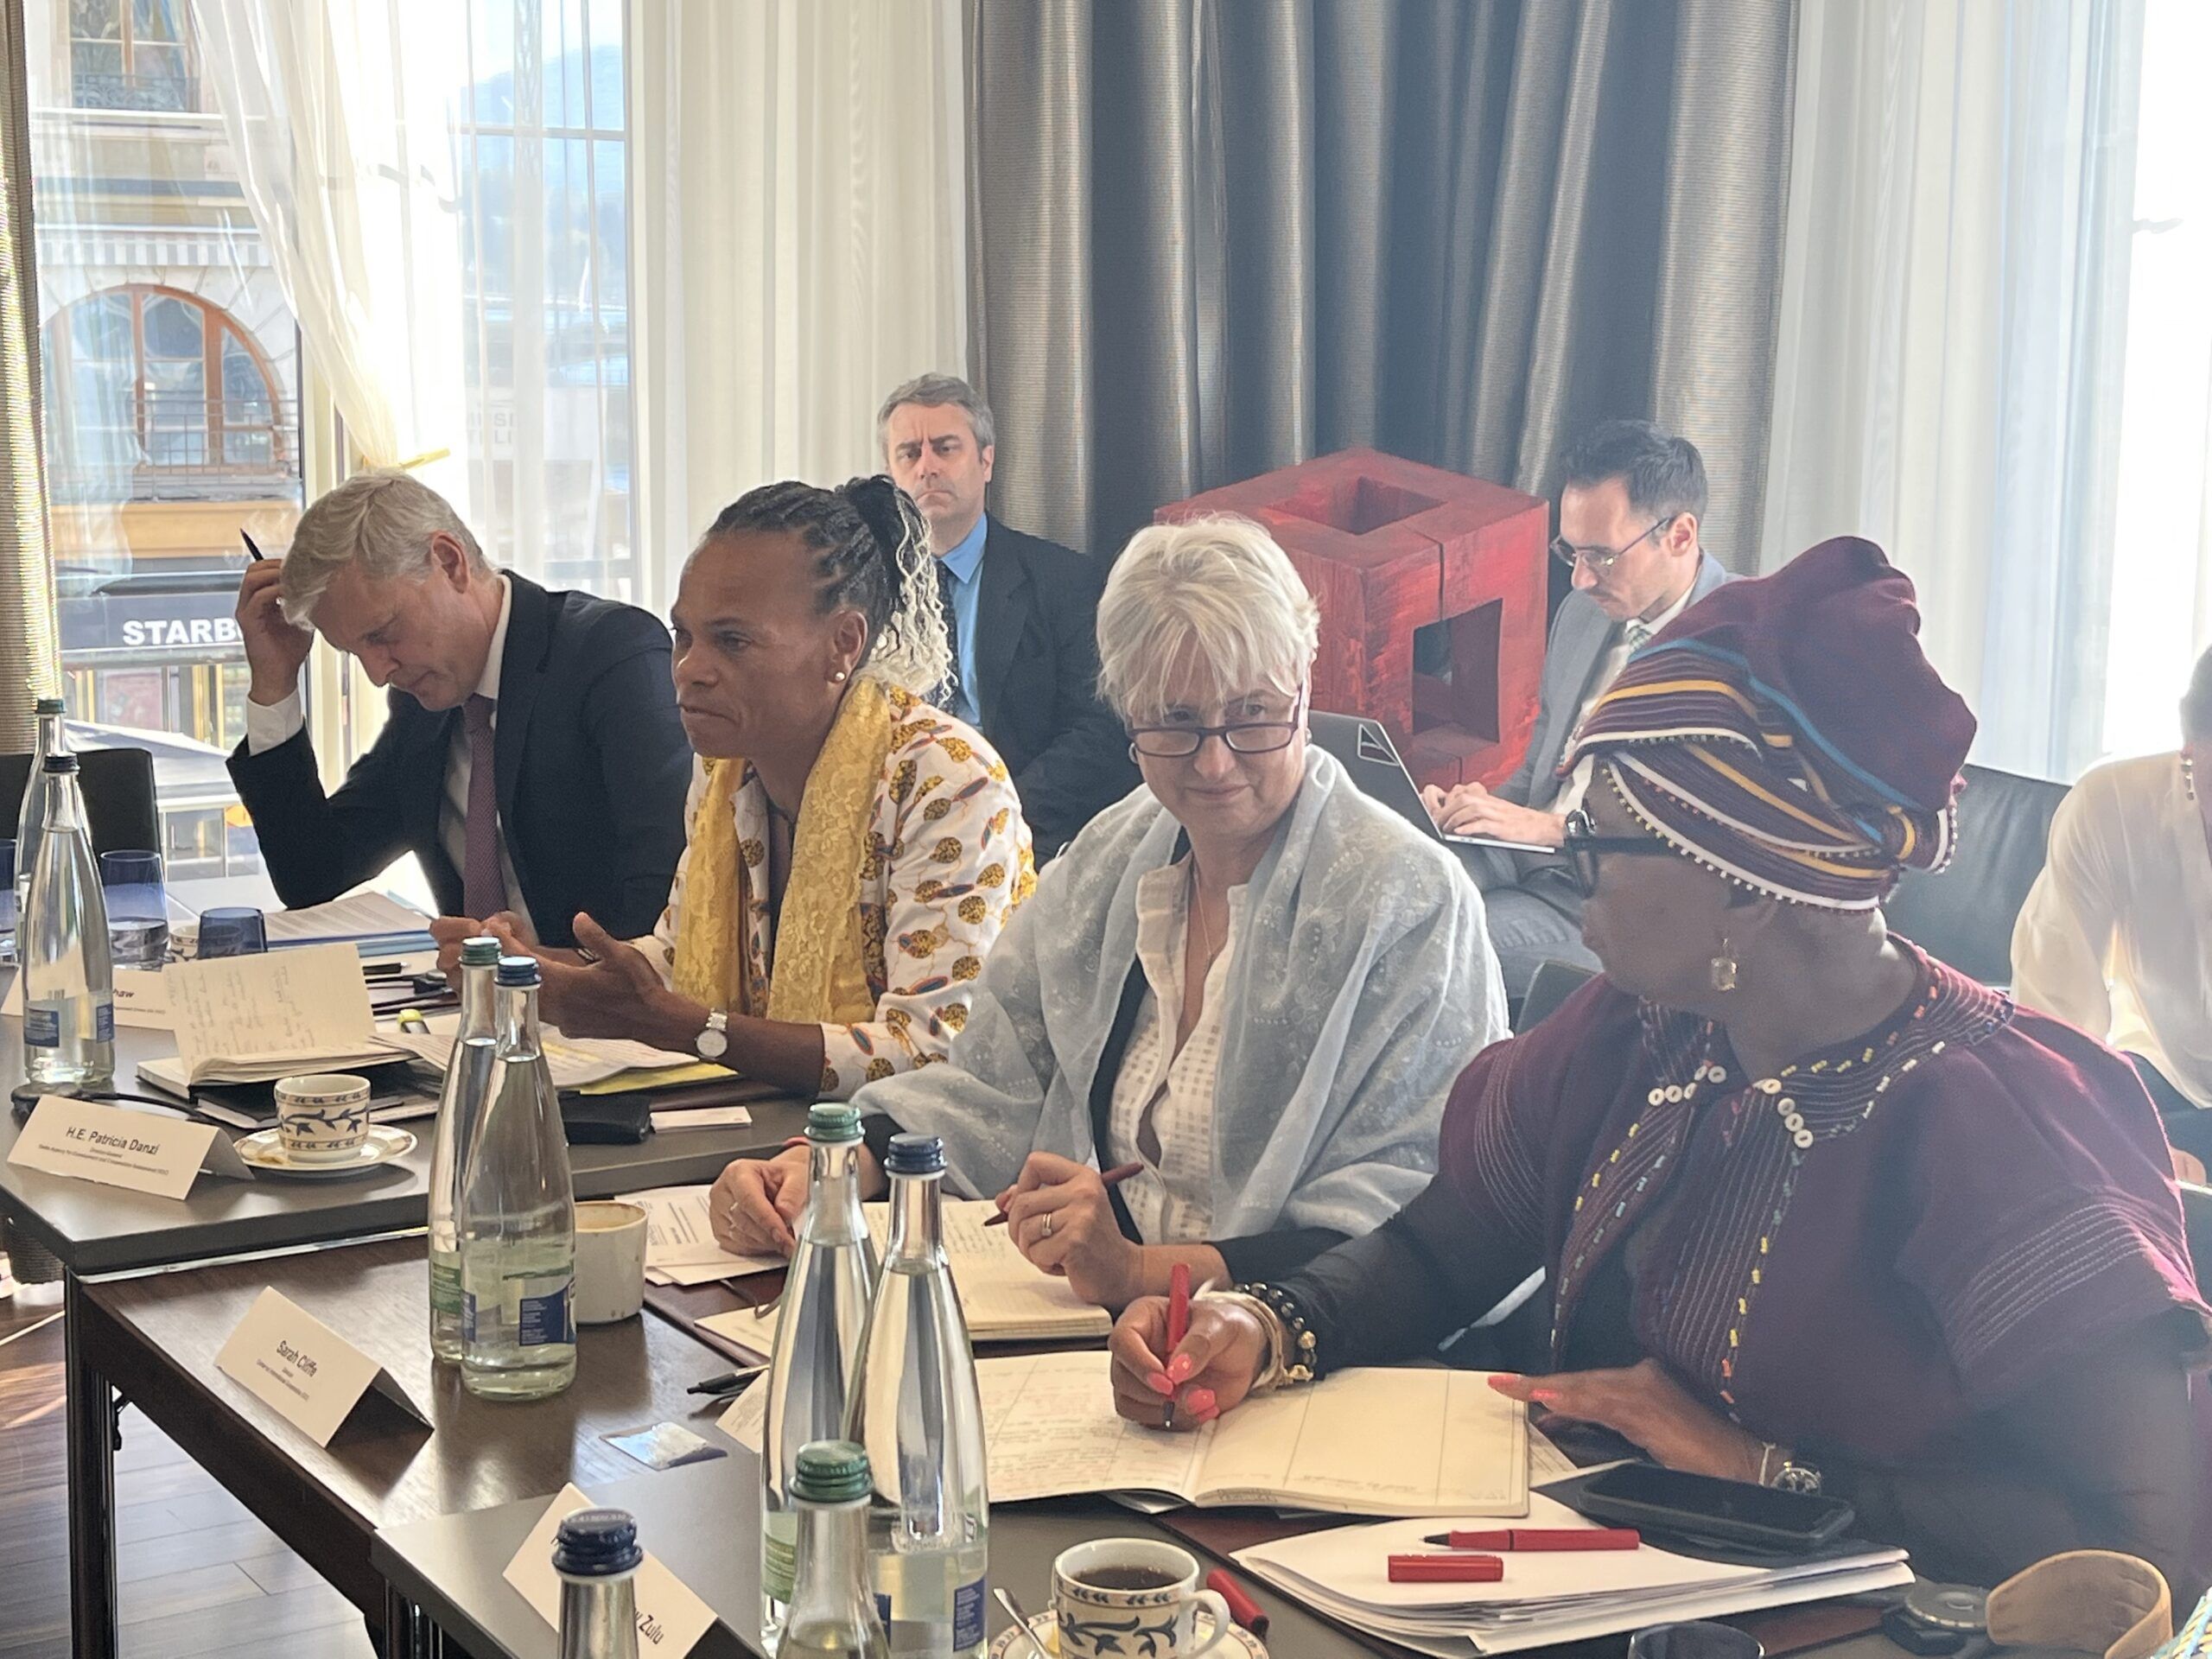 Pictured (left to right): Mark Shaw, Director of GI-TOC; H.E. Patricia Danzi, Director-General of the Swiss Agency for Development and Cooperation; Sarah Cliffe, Director of the Center on International Cooperation; H.E. Lindiwe Zulu, Minister of Social Development of South Africa.